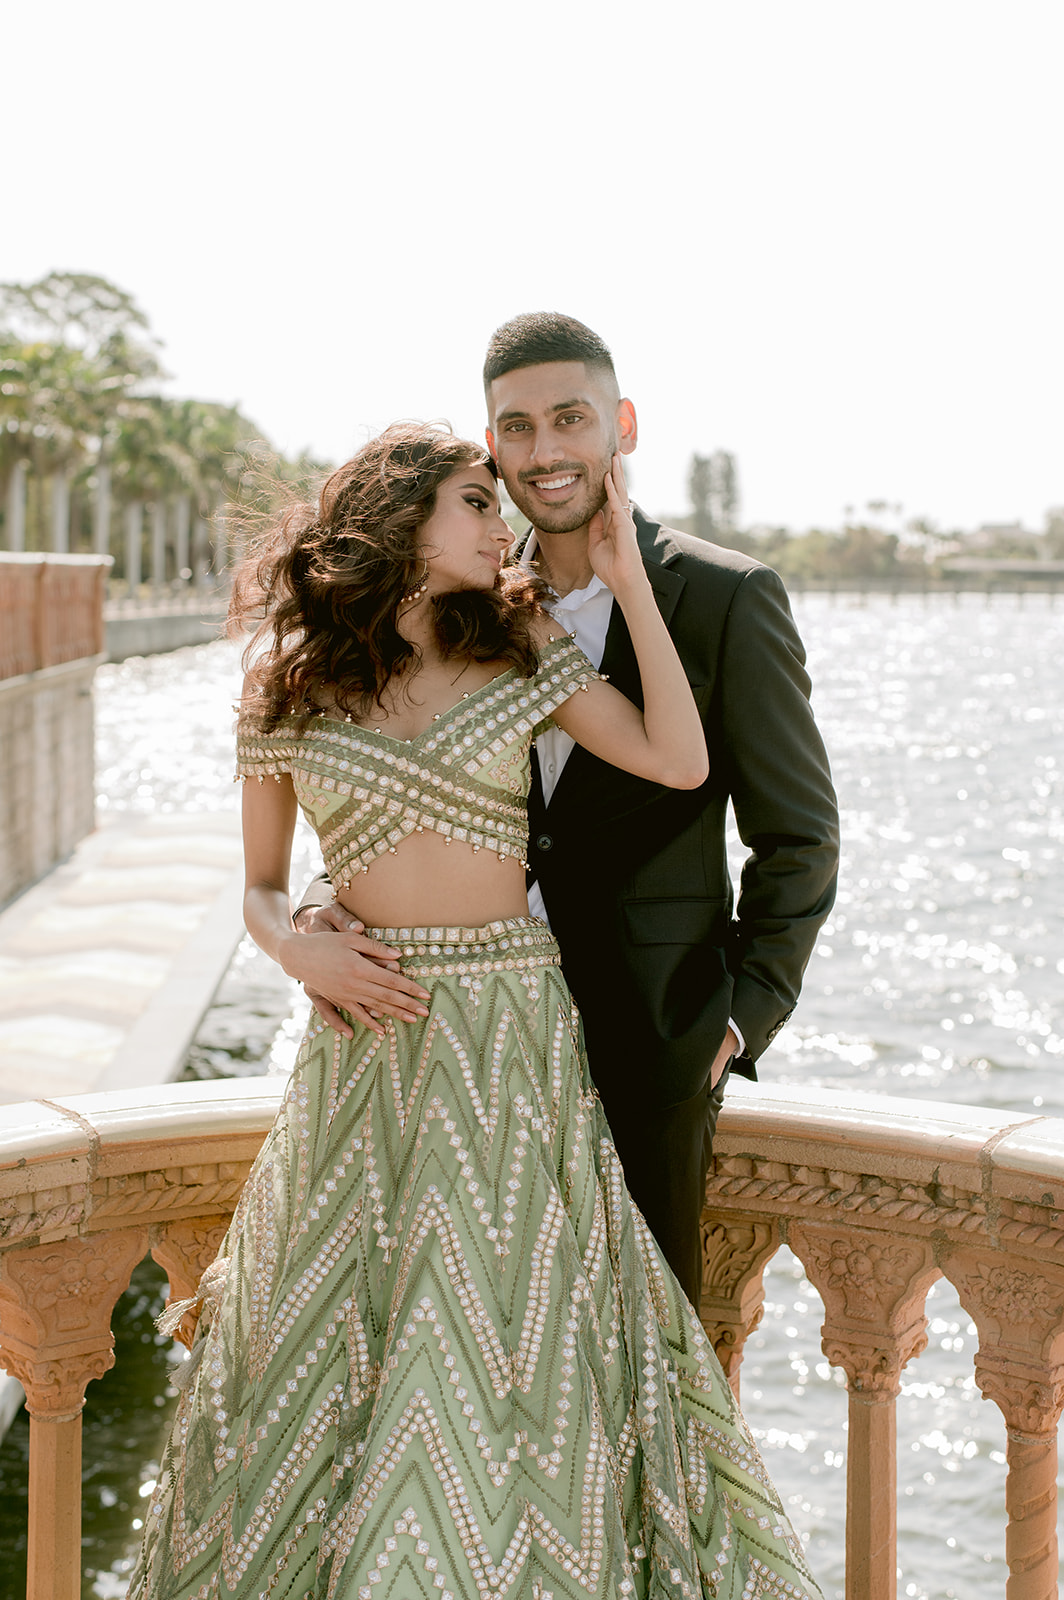 "Romantic engagement session at the John and Mable Ringling Museum features stunning Indian couple"
